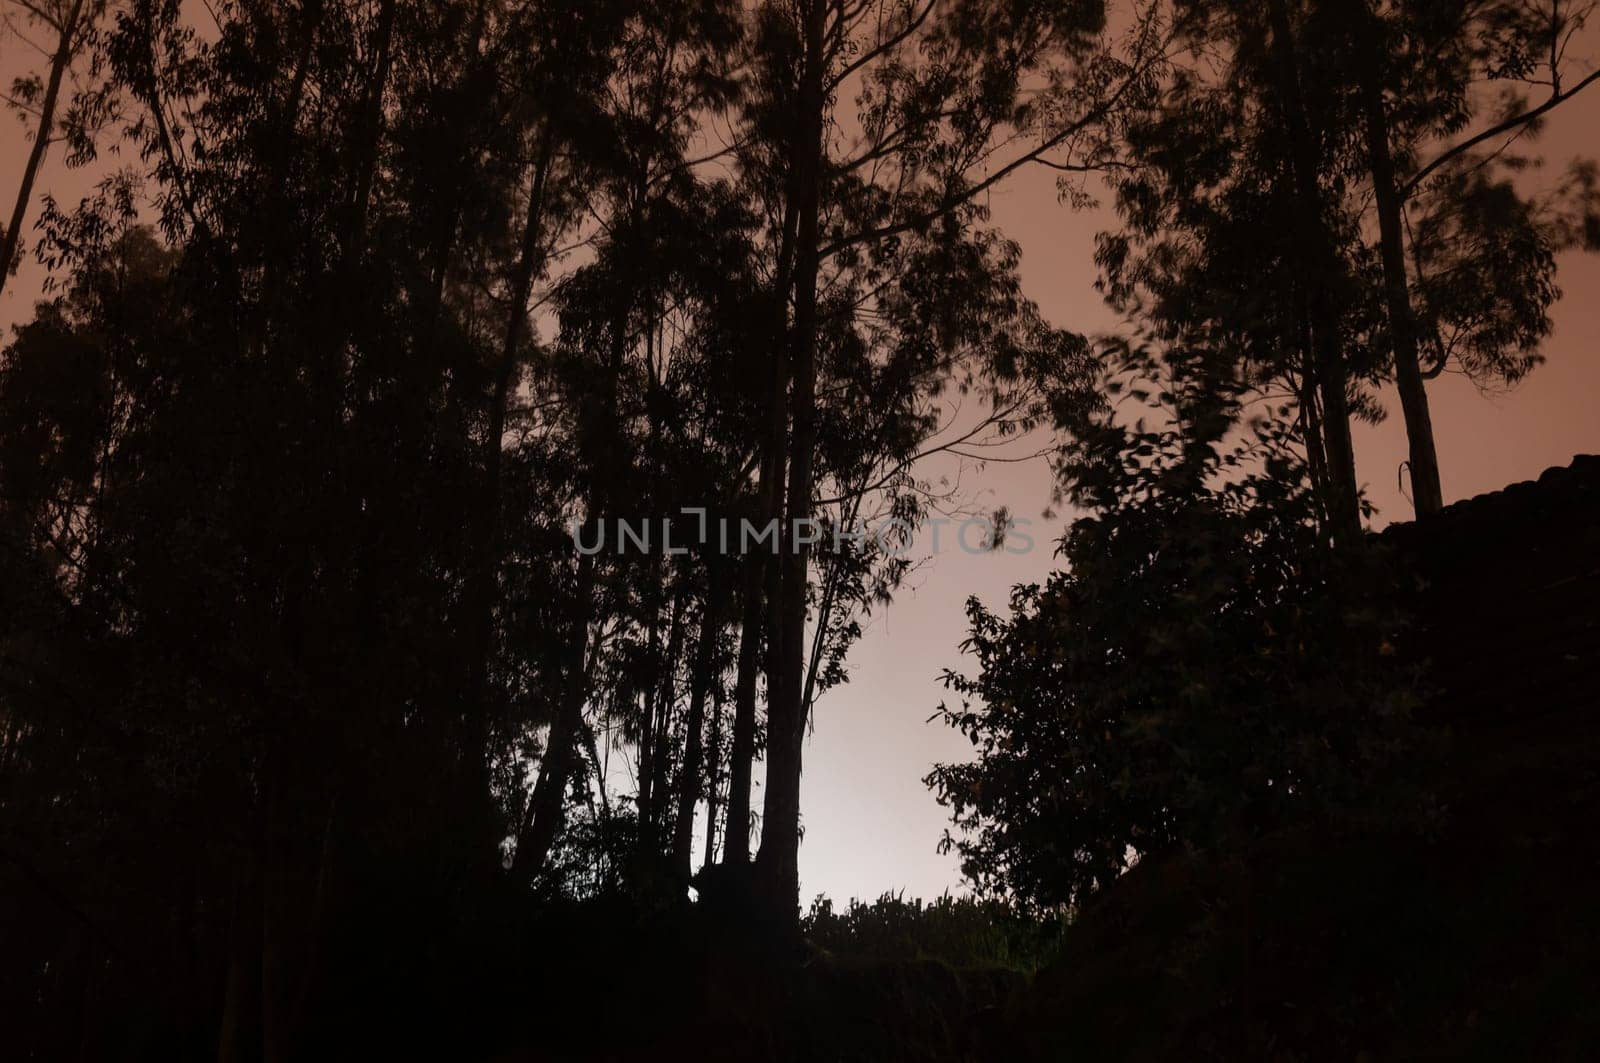 moonlit forest scenery the white and orange light and the black silhouettes of a lush forest by Raulmartin